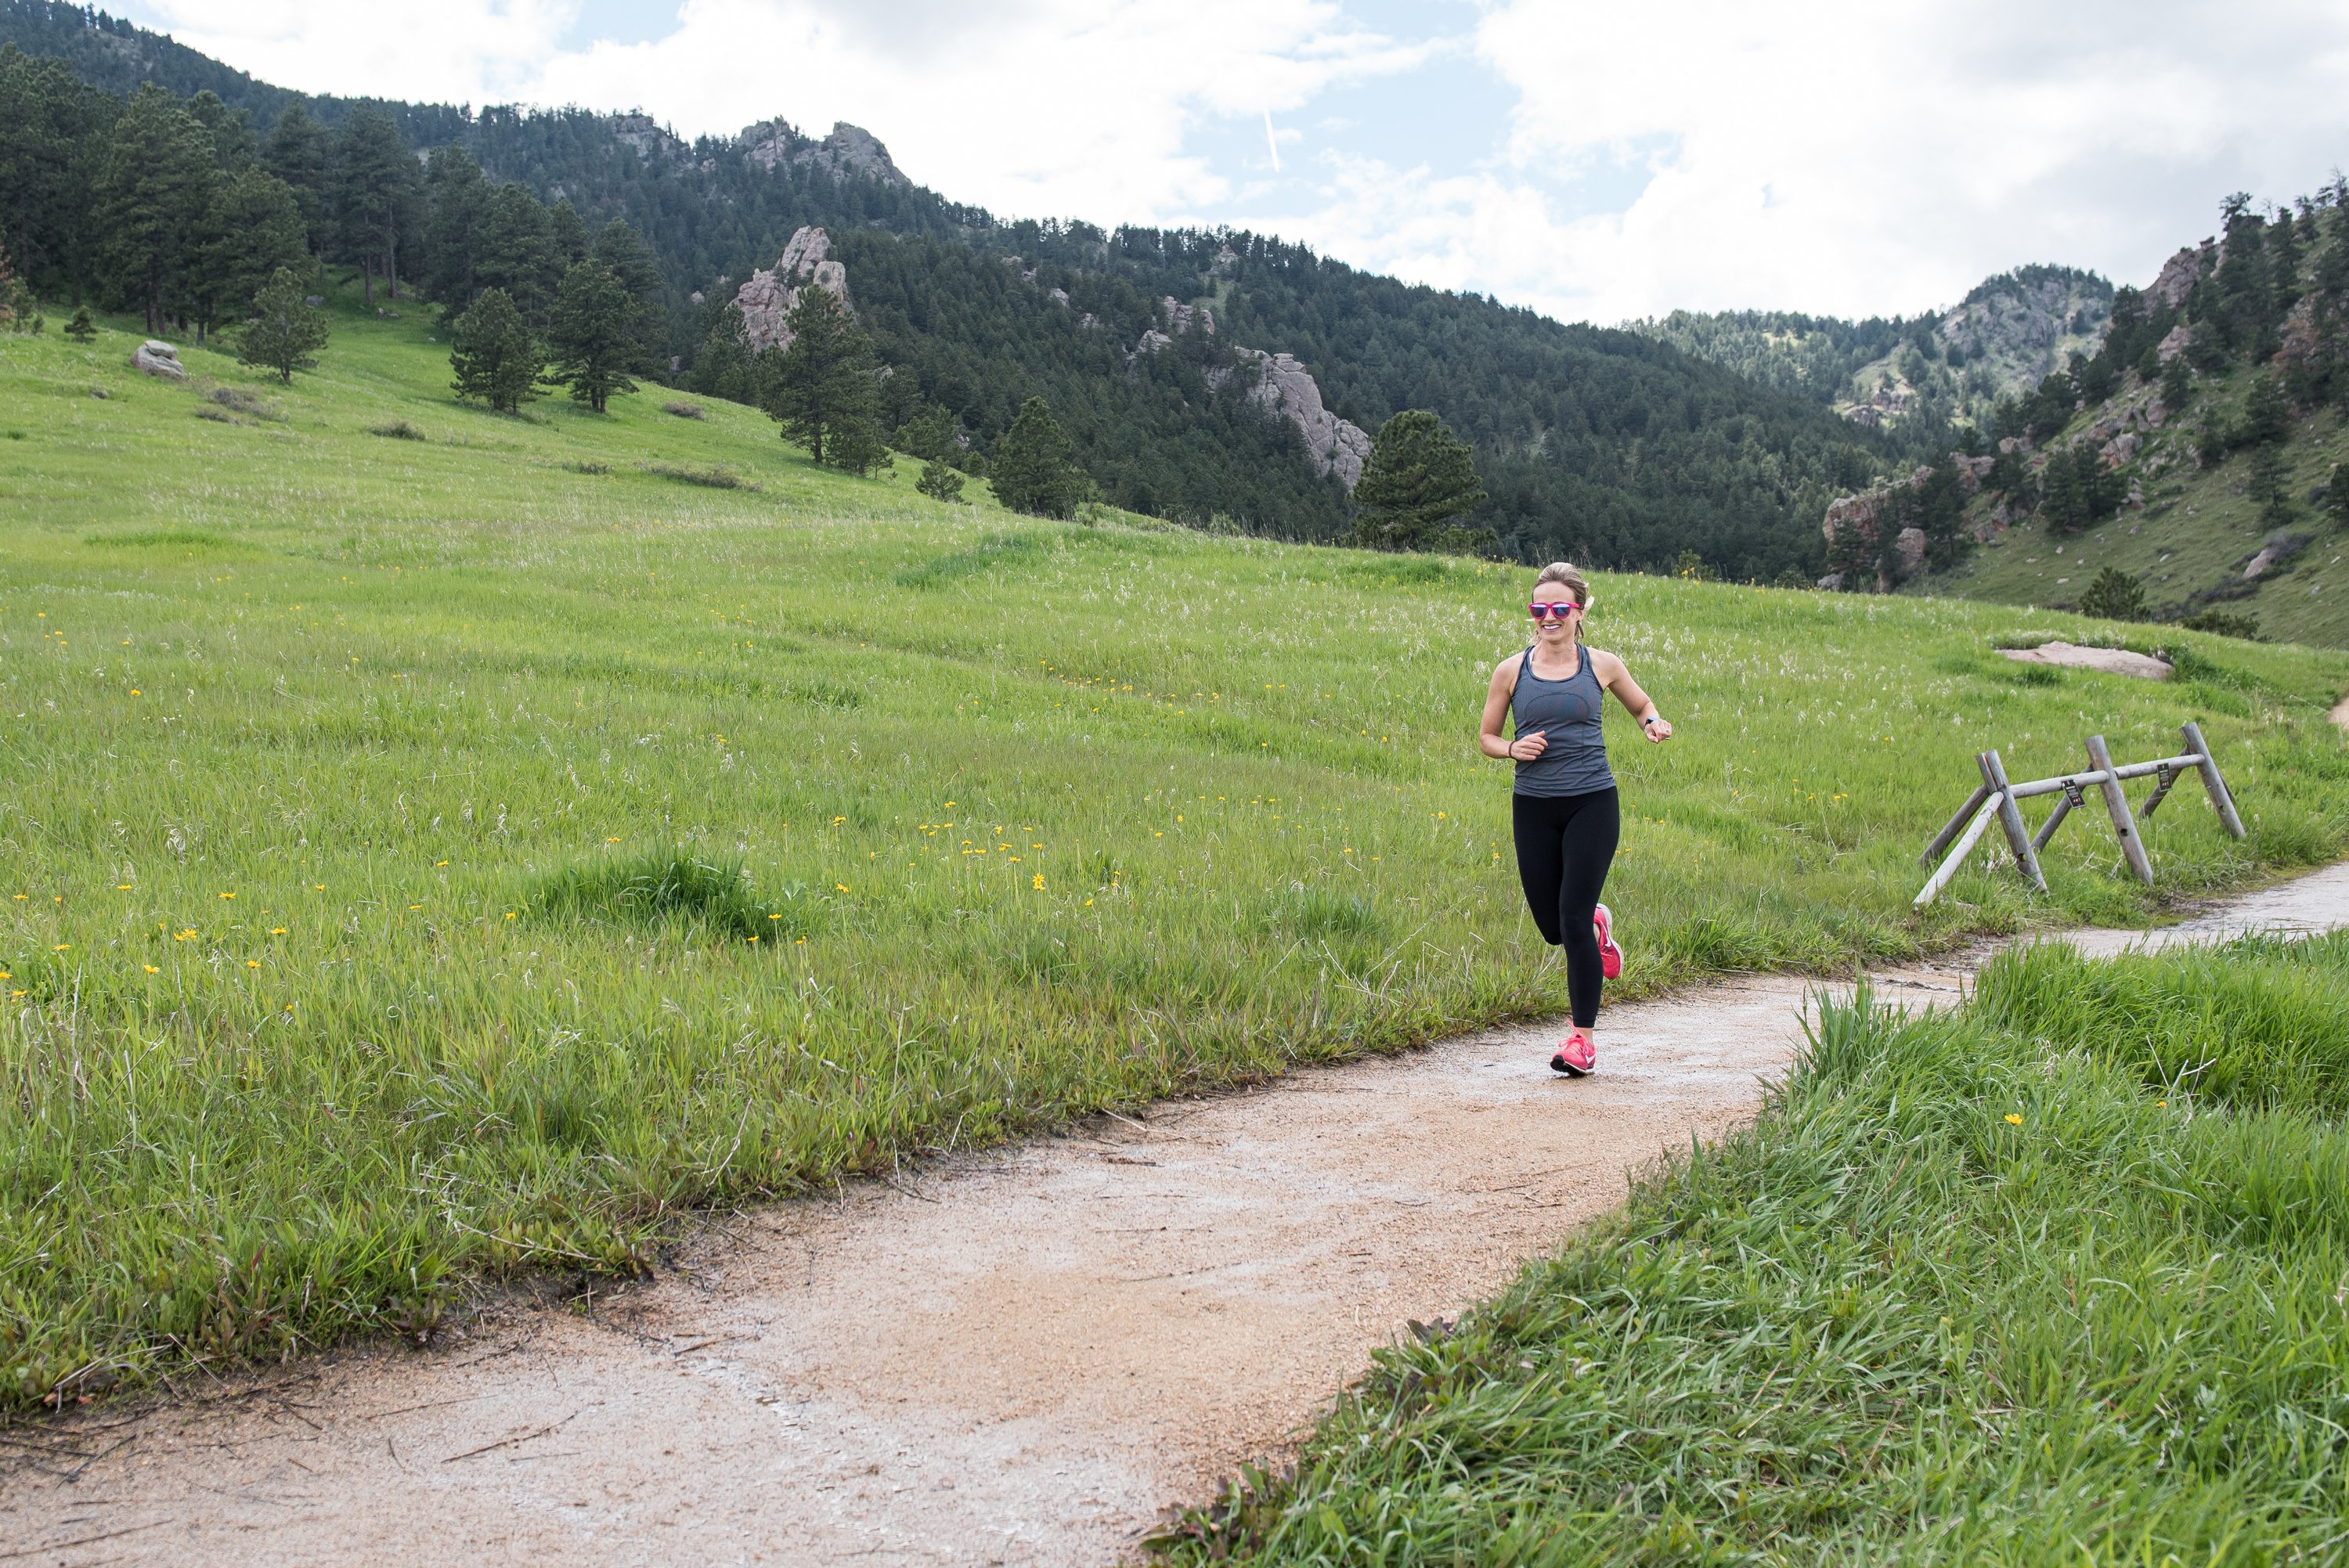 How to exercise on vacation without ruining vacation | runner in chautaqua park boulder colorado